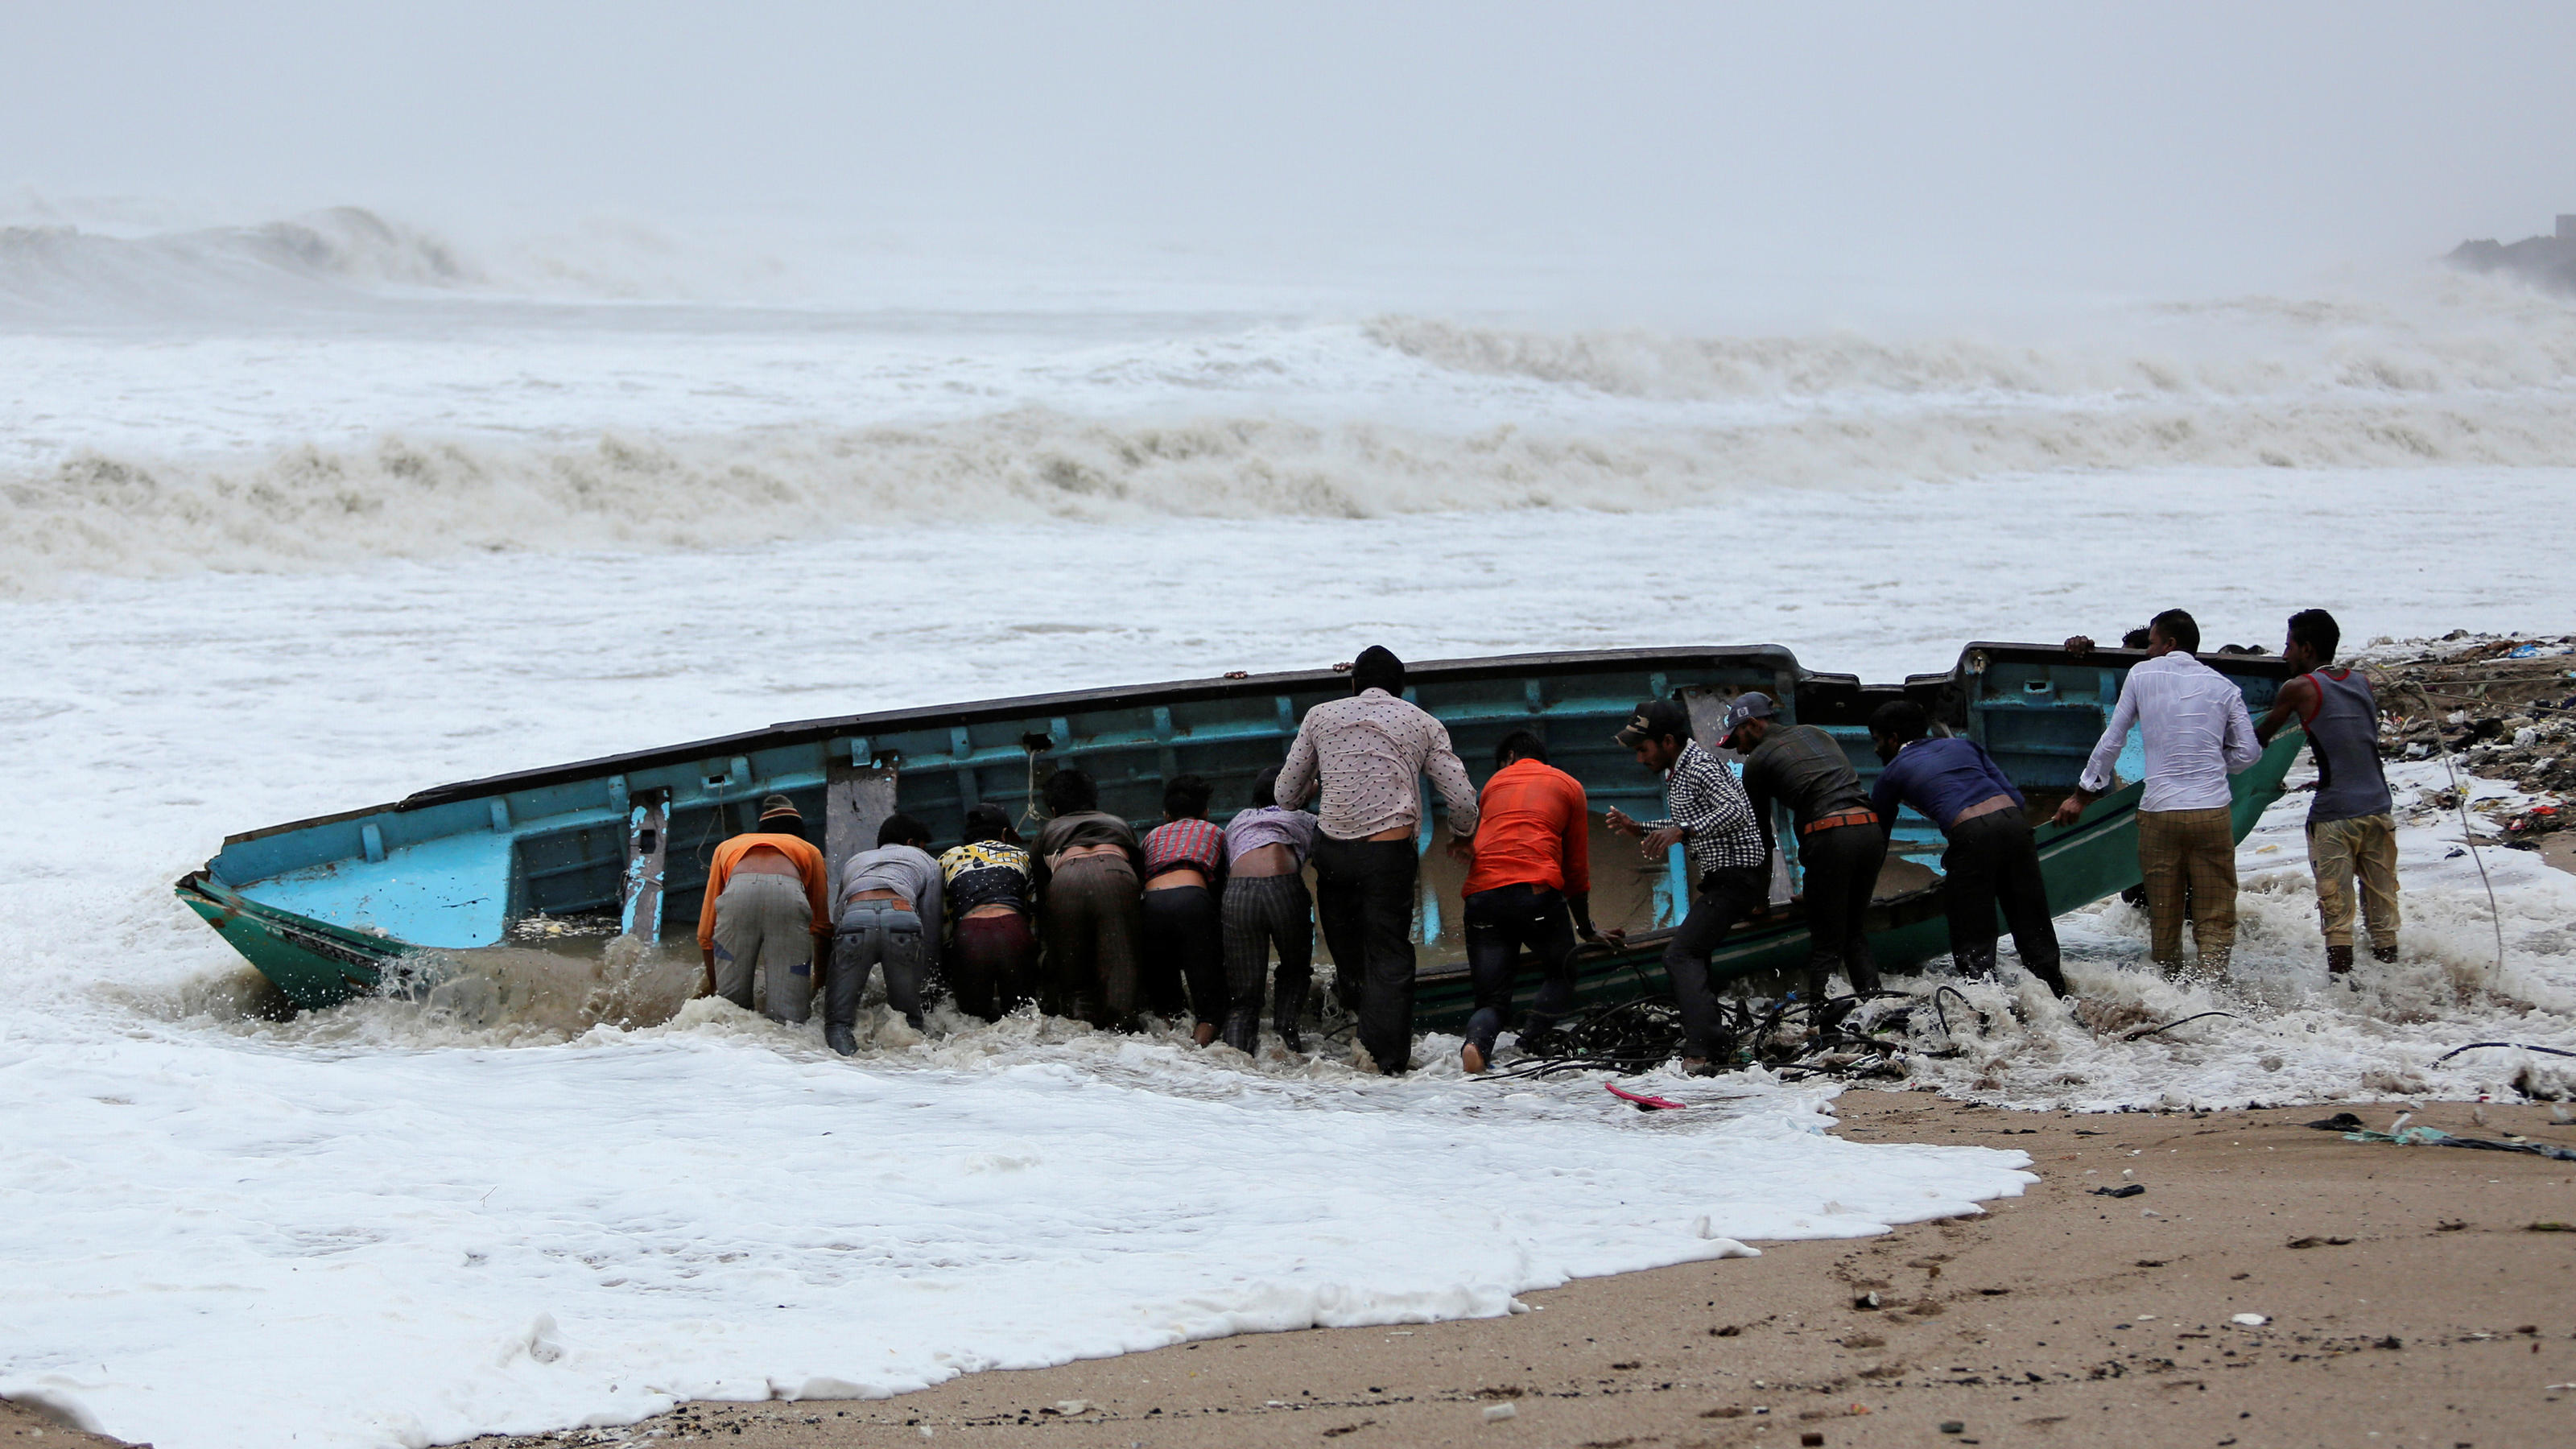 Fishermen move a fishing boat to a safer place along the shore ahead of Cyclone Vayu in Veraval, India, June 13, 2019. REUTERS/Amit Dave